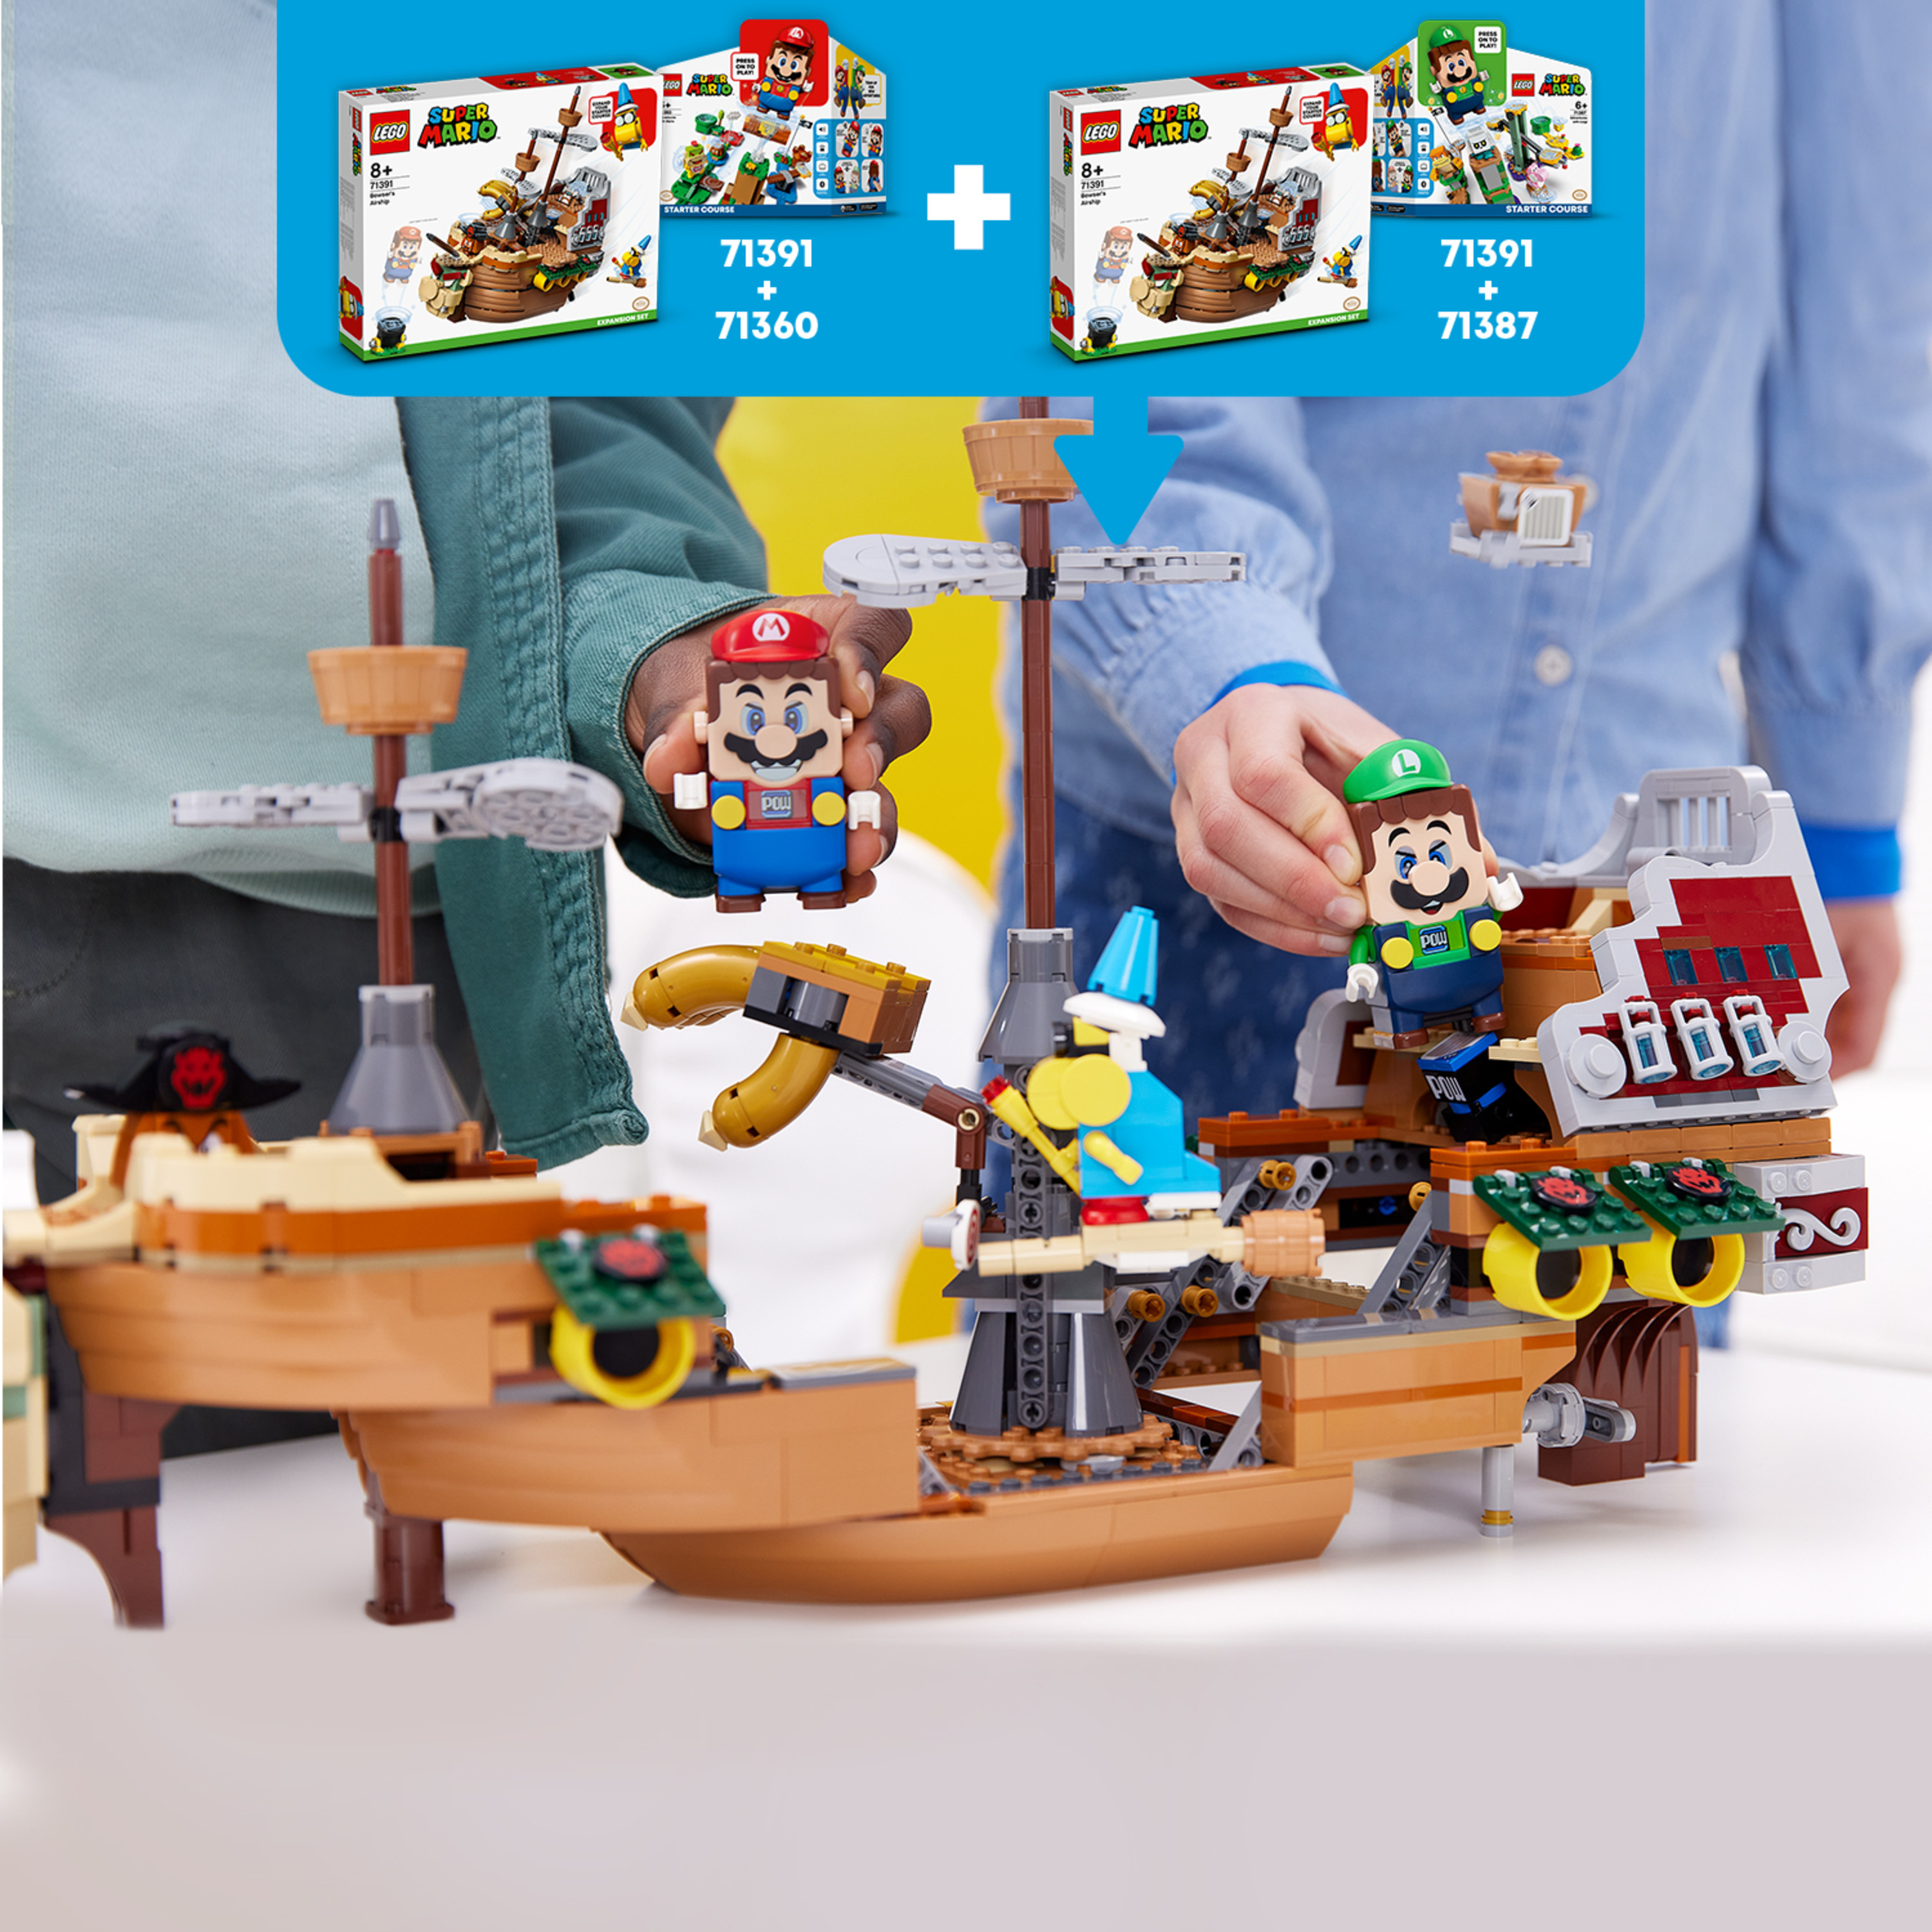 LEGO Super Mario Bowser’s Airship Expansion Set 71391 Building Toy for Kids (1,152 Pieces) - image 4 of 7